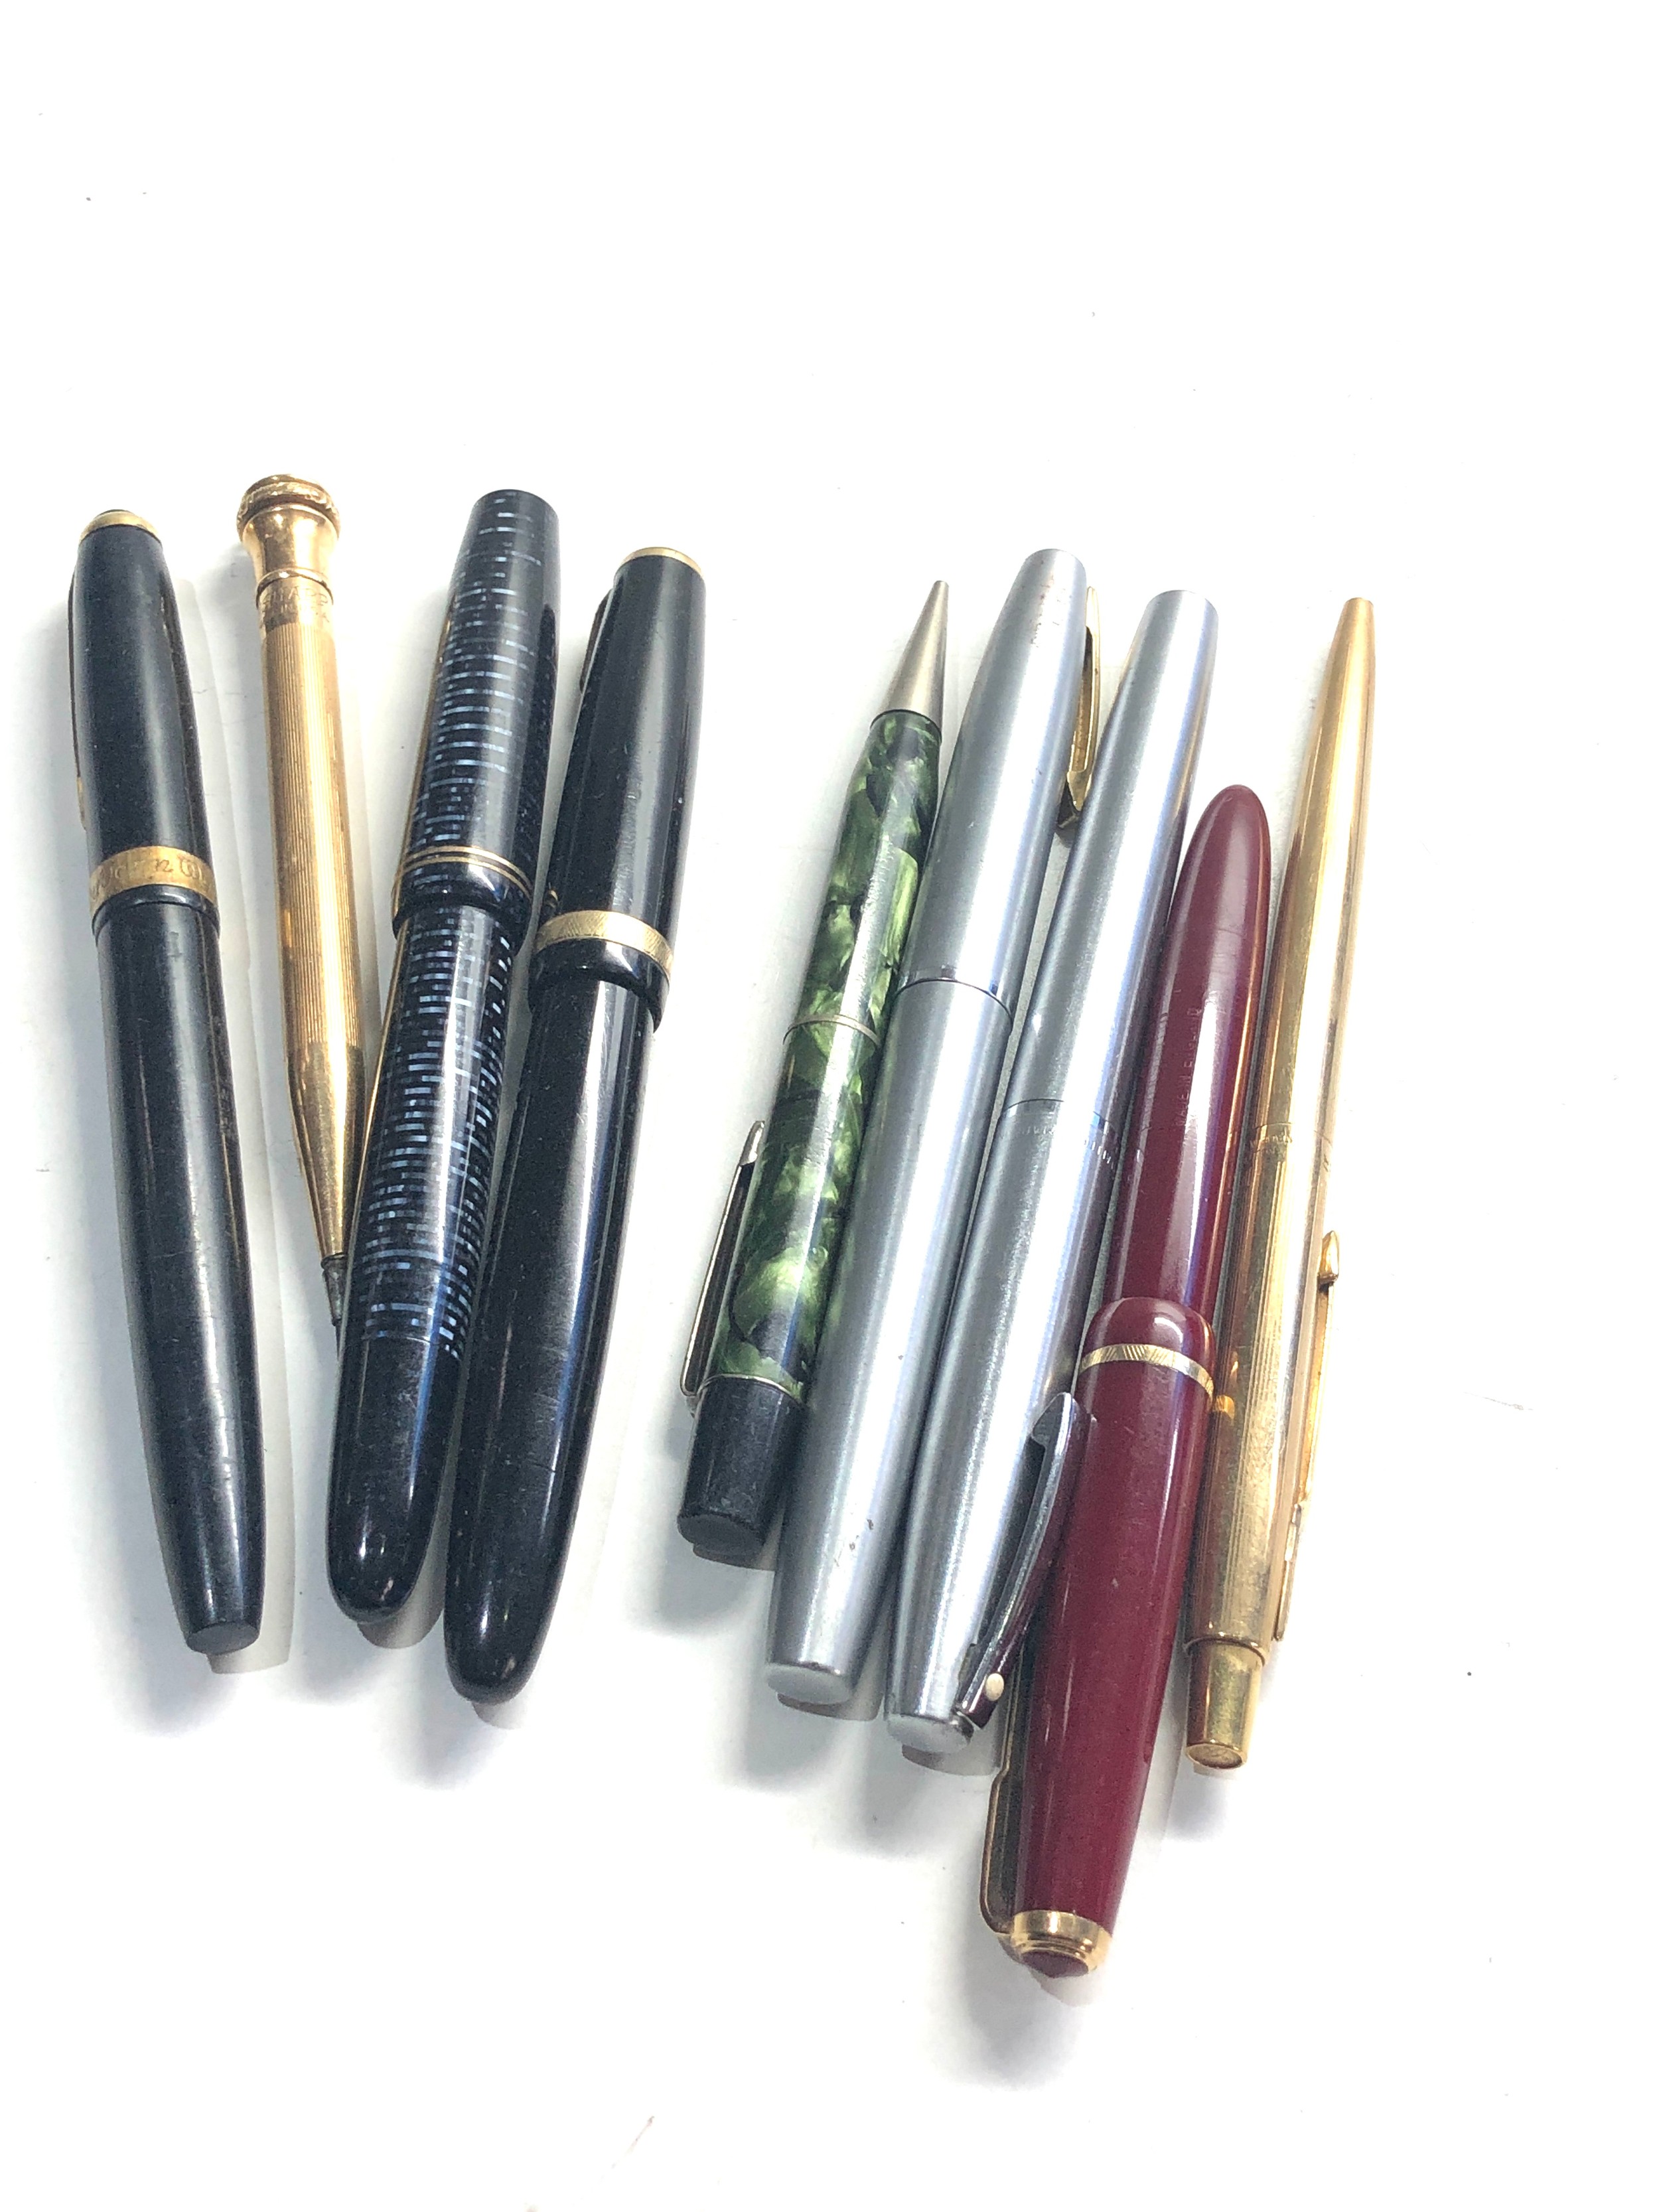 Selection of Vintage fountain pens includes 14ct gold nib parkers sheaffer wyvern etc